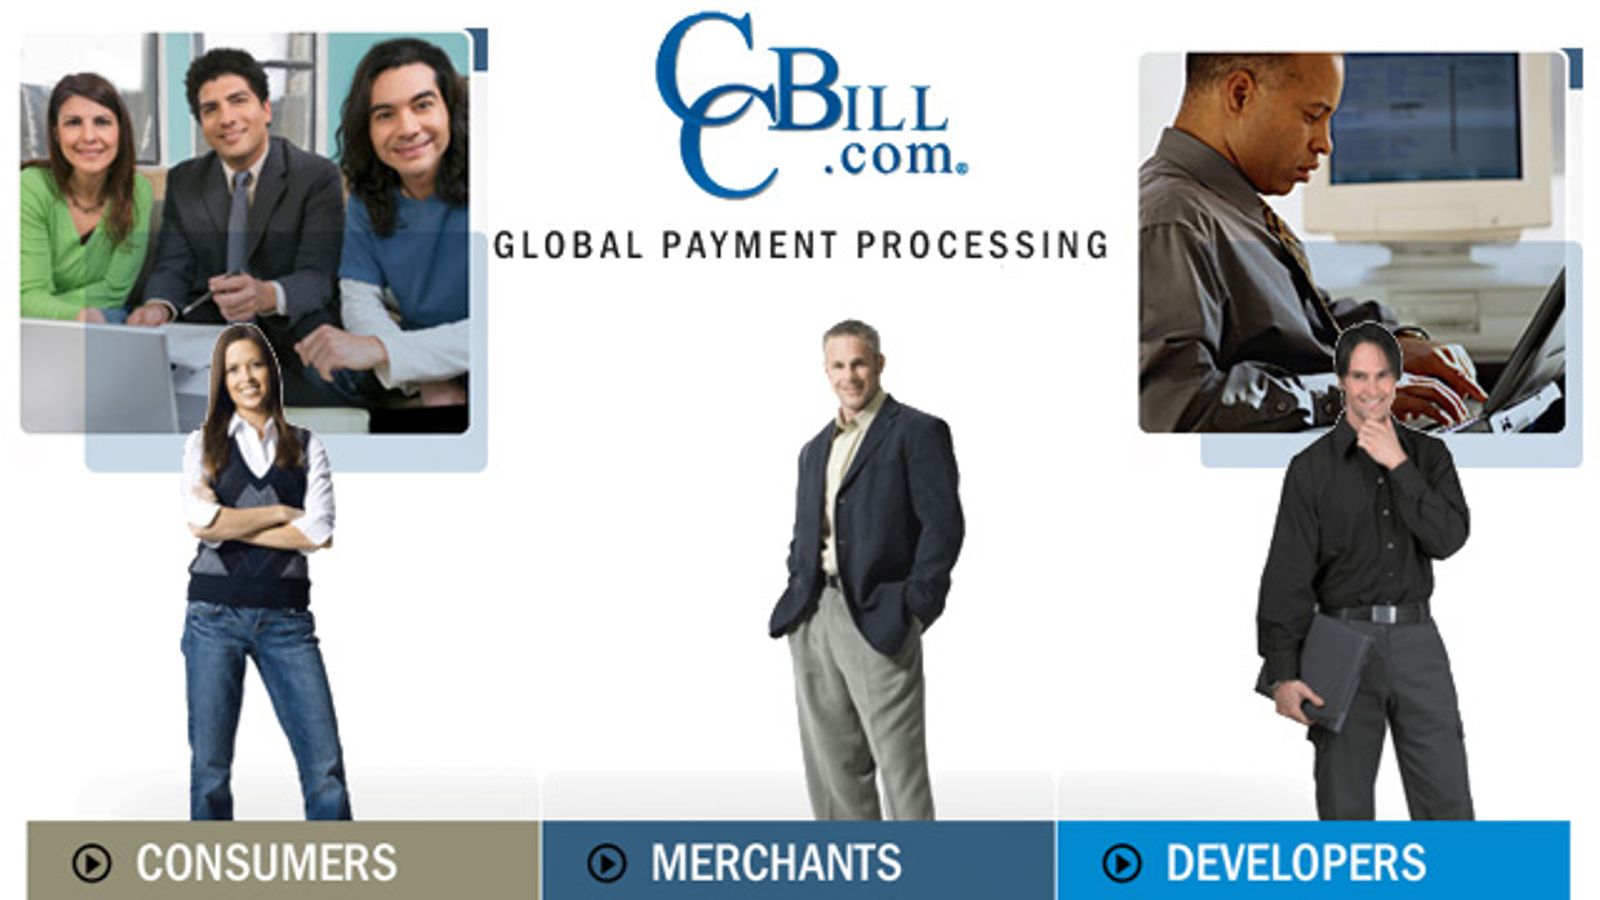 CCBill FlexForms System Moves to Open Beta